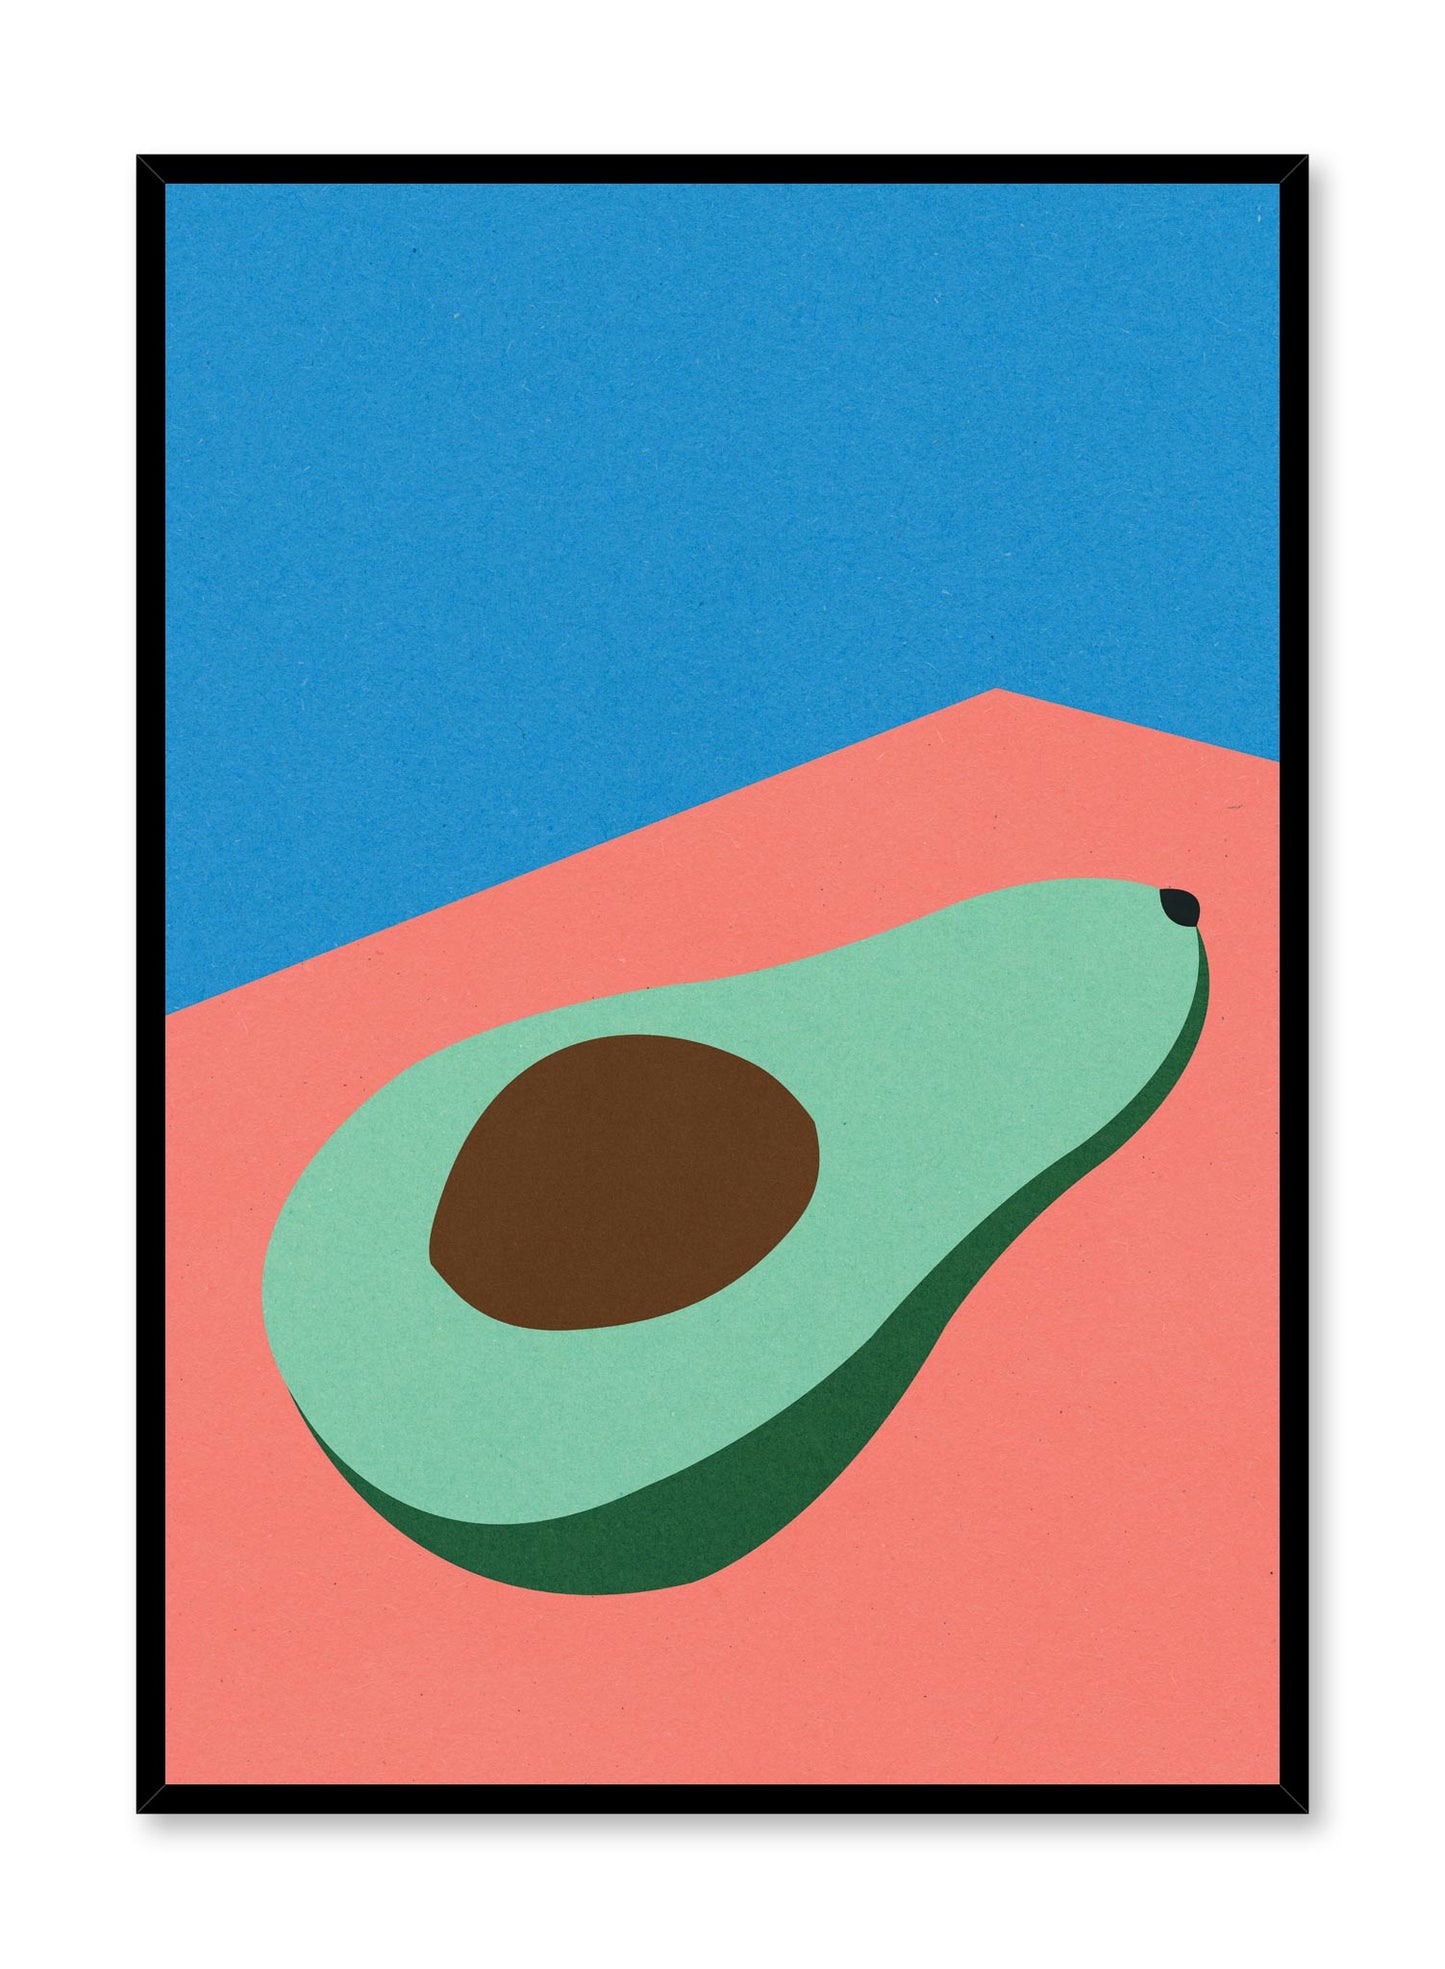 Modern minimalist poster by Opposite Wall with abstract collage illustration of avocado